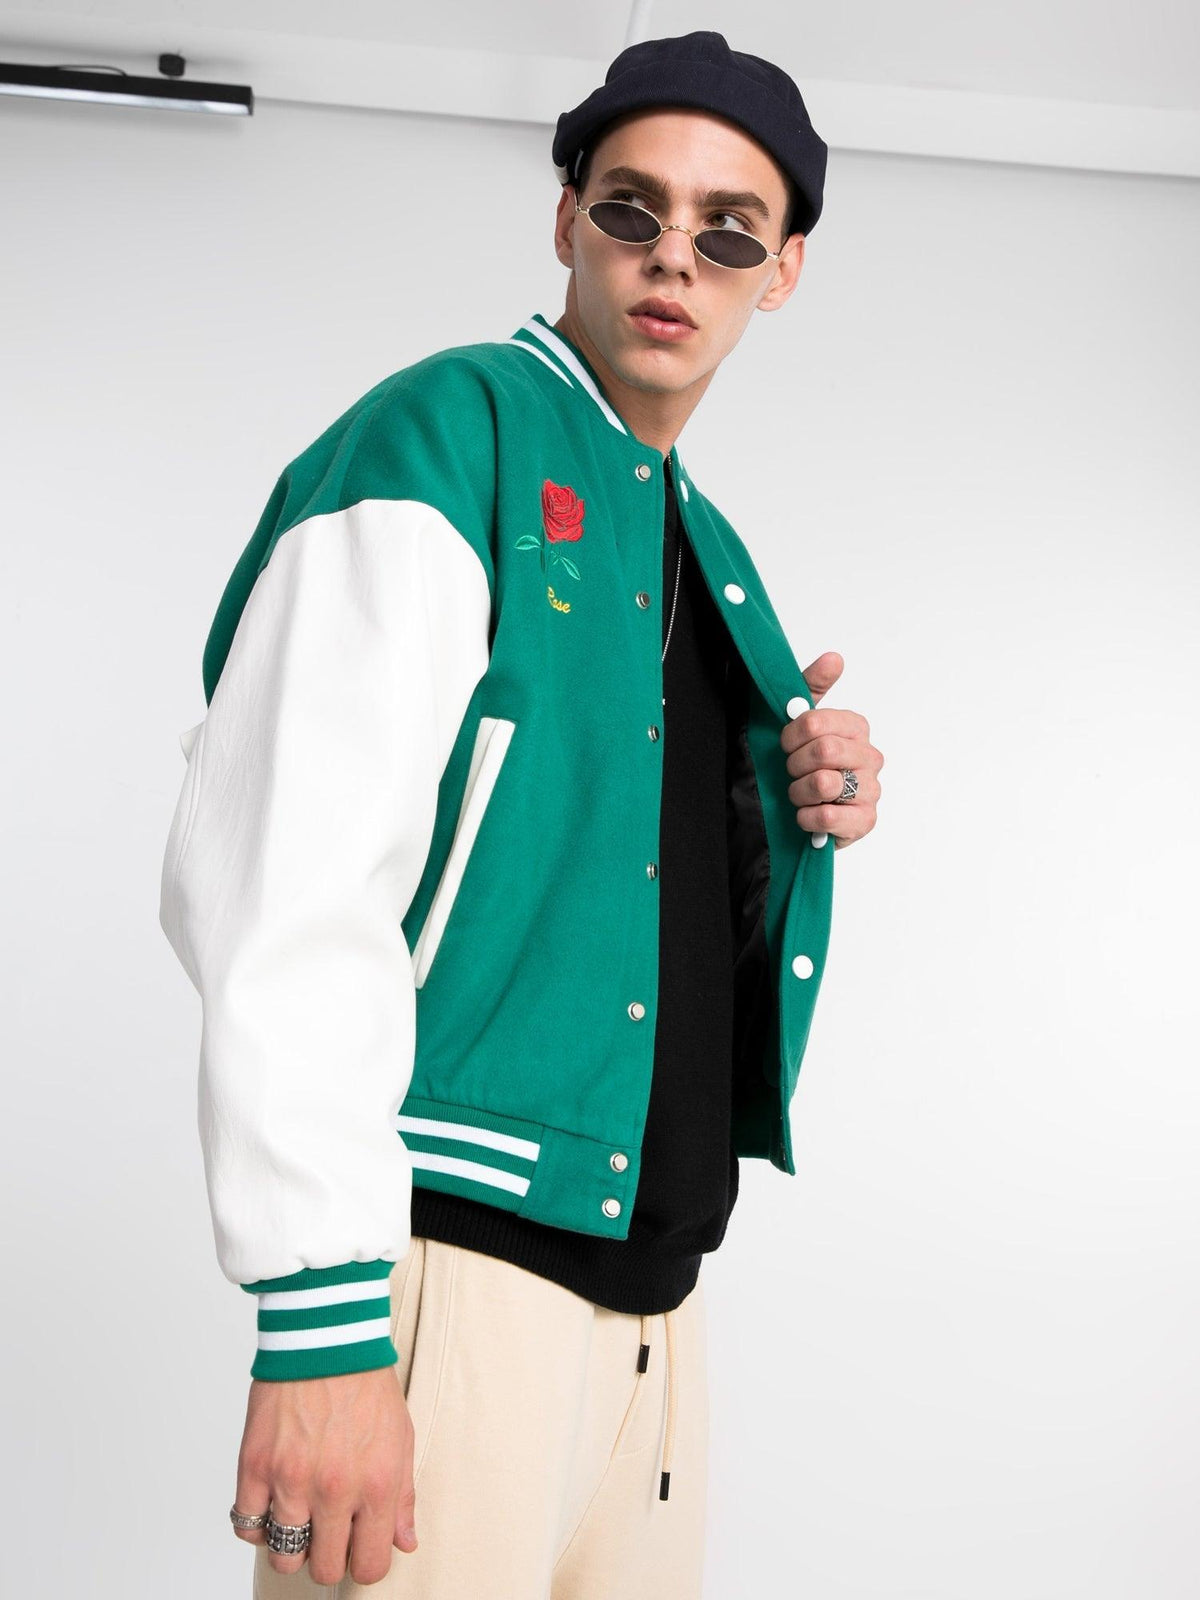 LUXENFY™ - GEESAS Embroidered Varsity Jacket